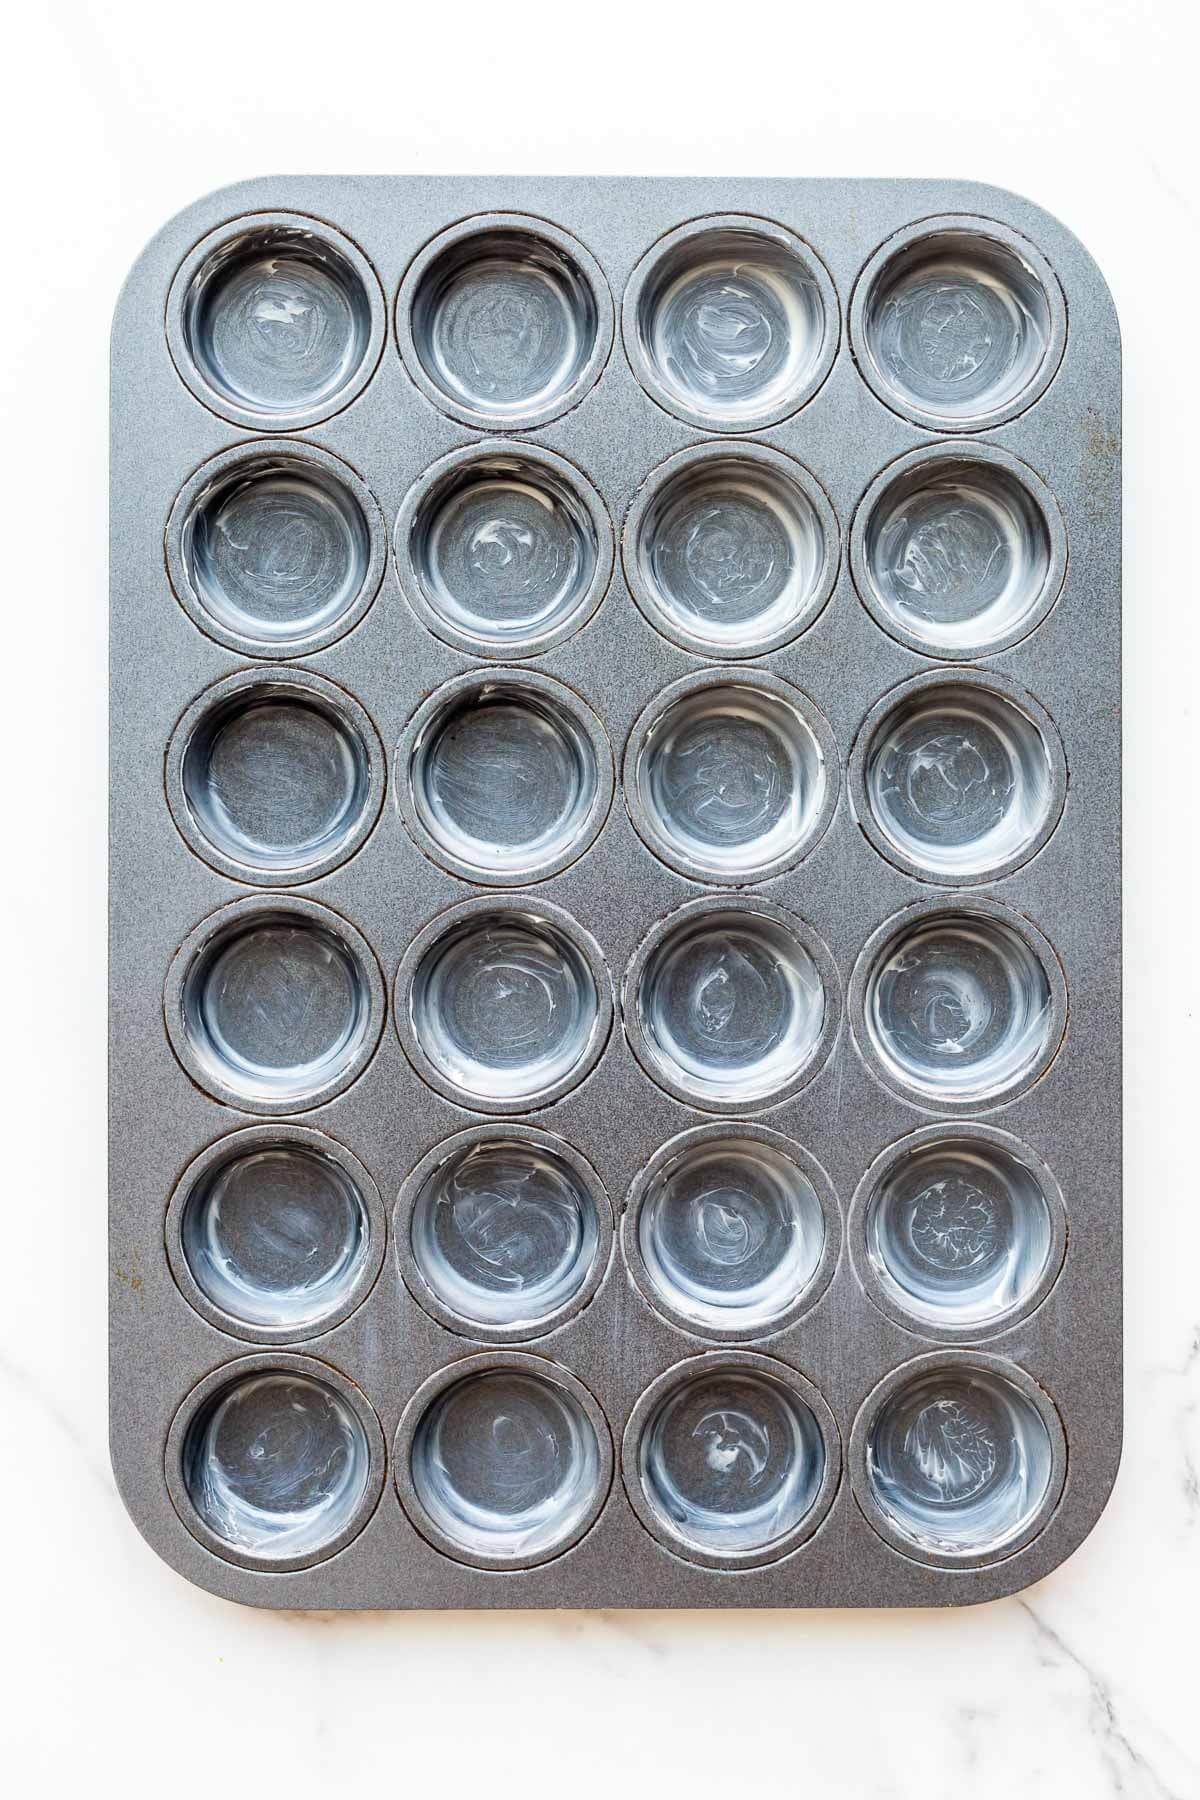 A greased mini muffin pan. The wells were greased with softened butter to coat the bottom and sides.